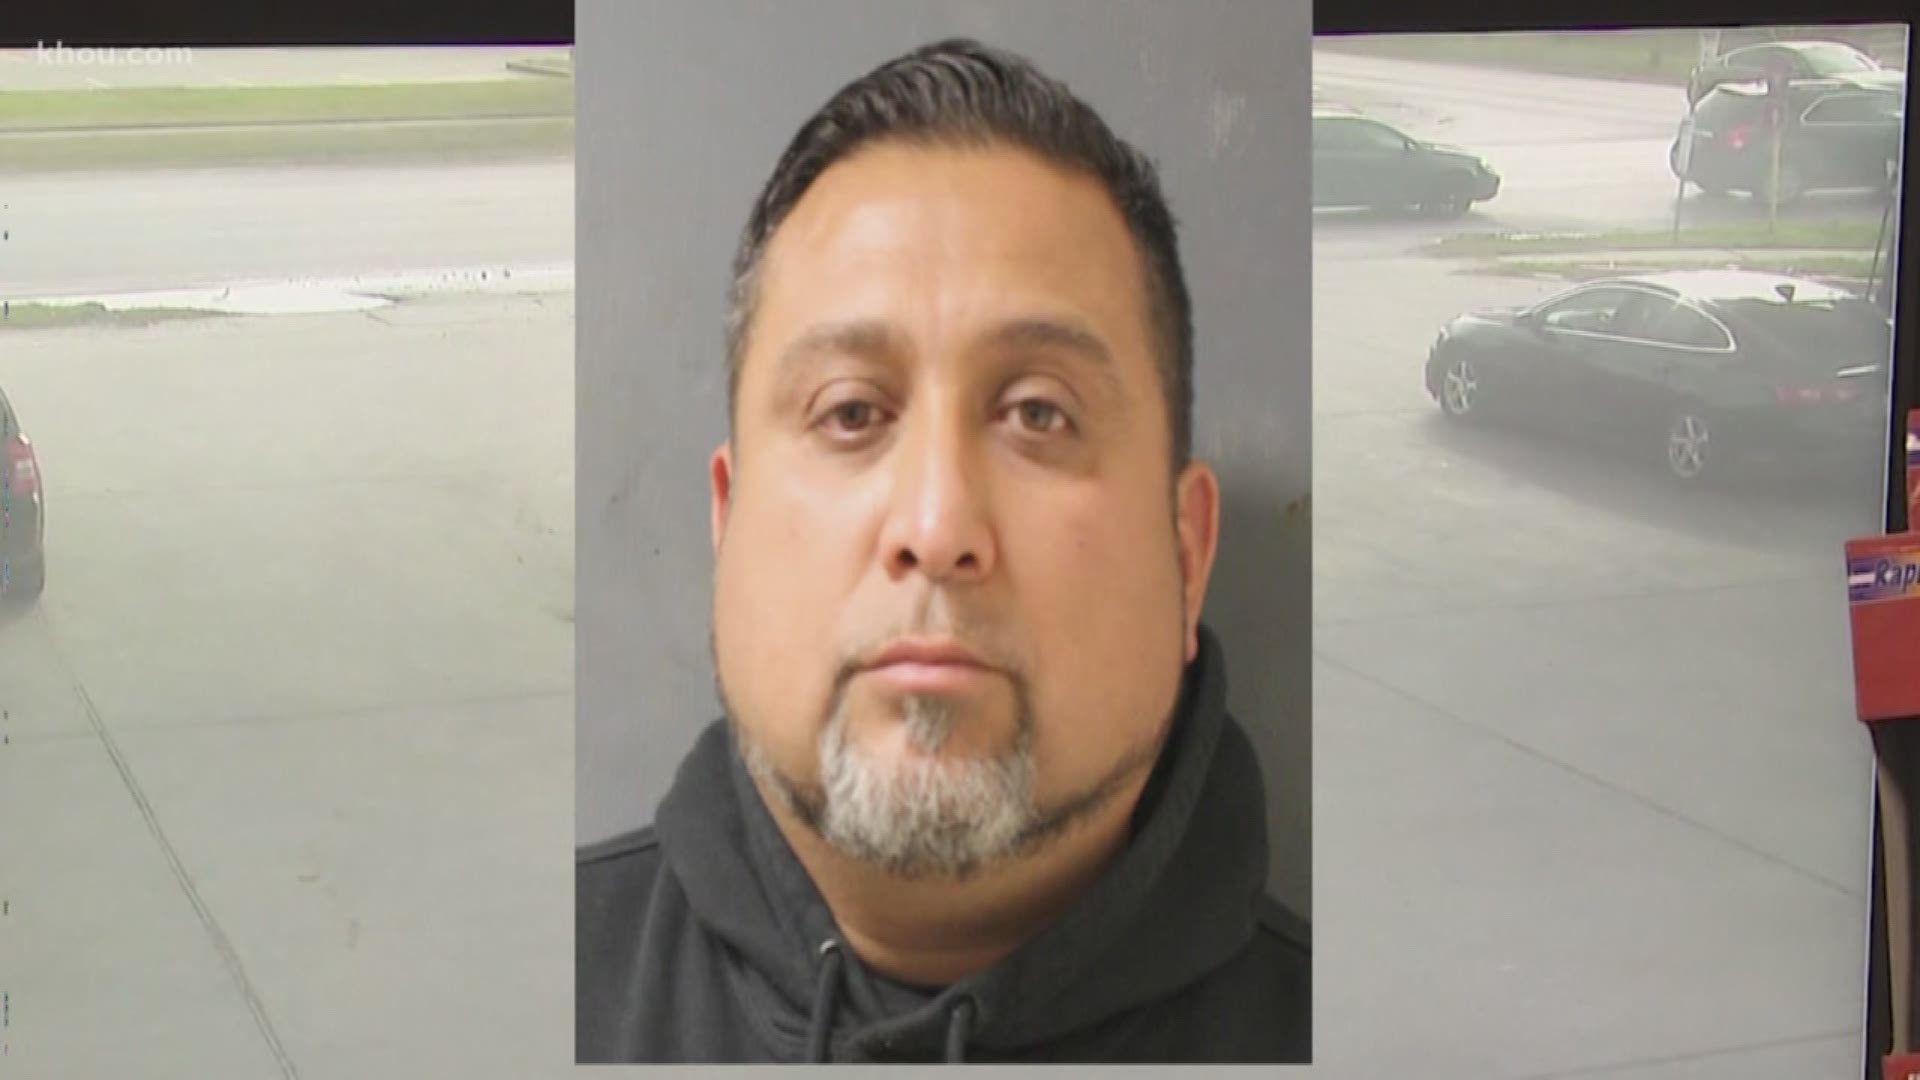 Police say witnesses also saw Christopher Lopez, 48, pointing a gun out of his window and firing at the teens.